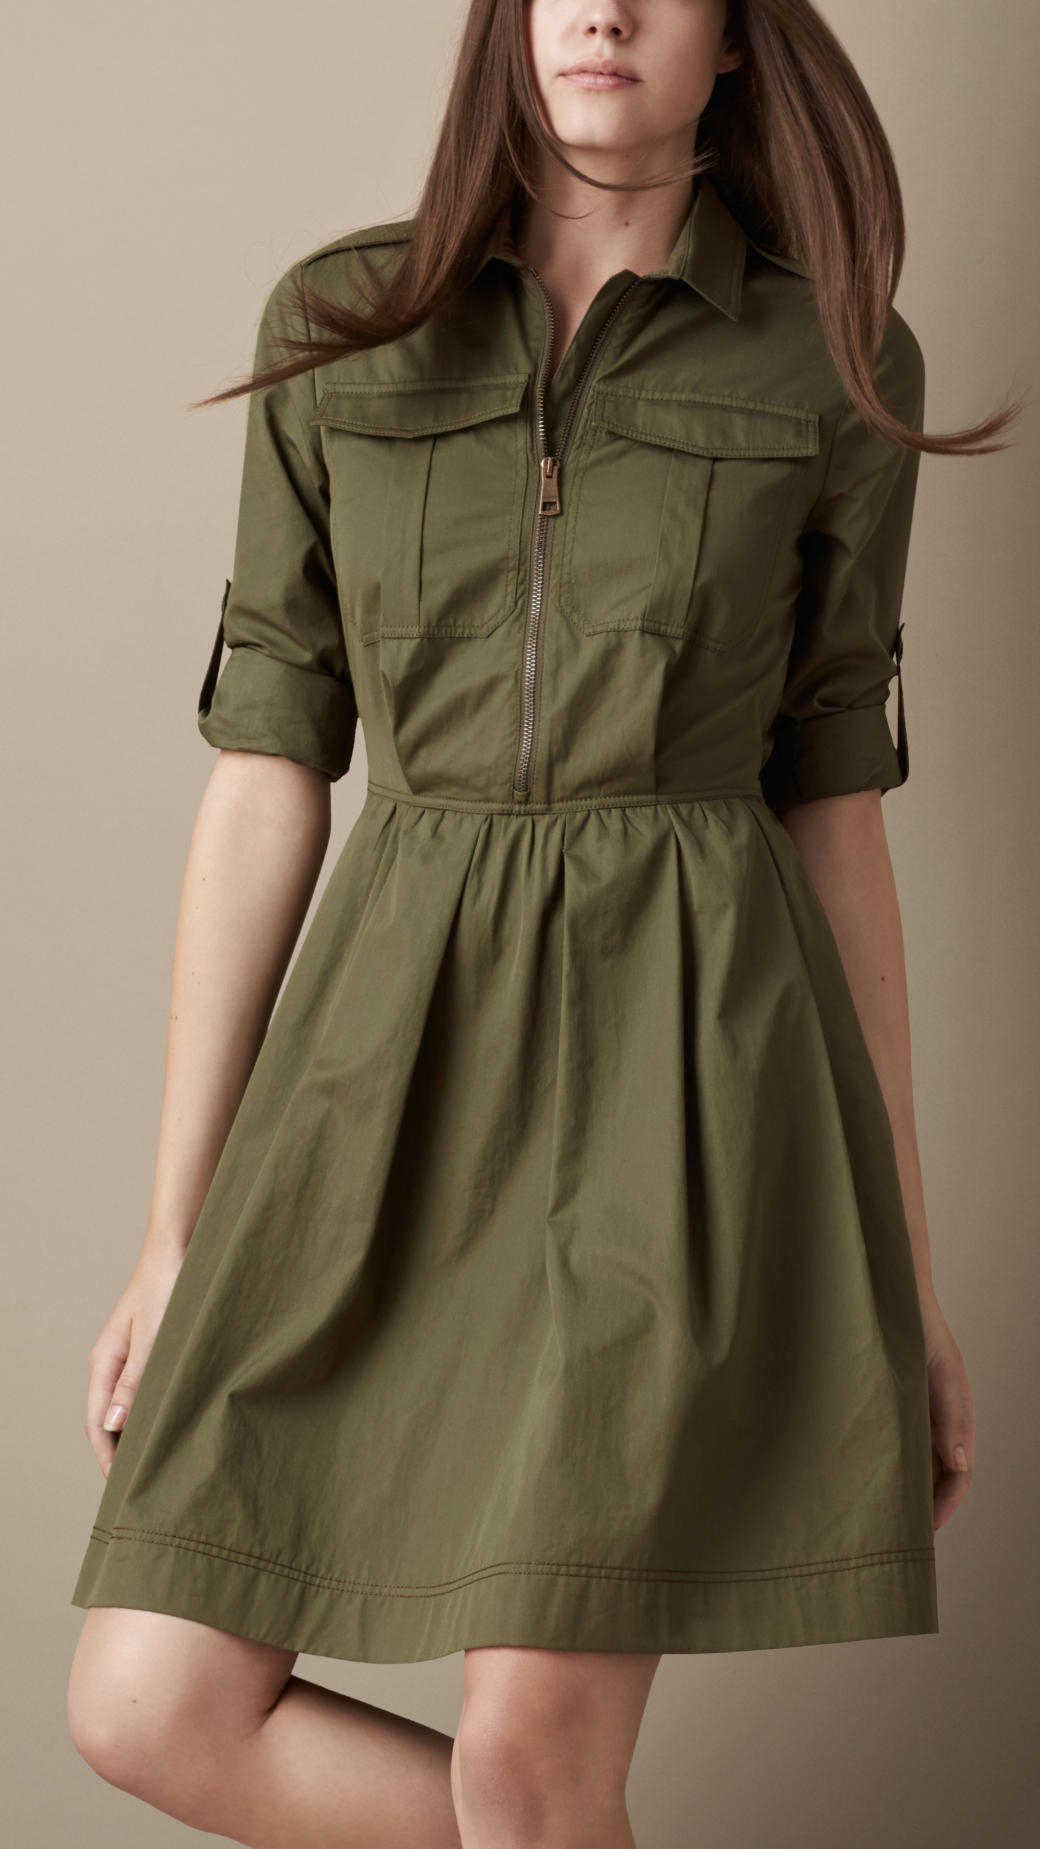 Lyst - Burberry Heritage Shirt Dress with Leather Belt in Green